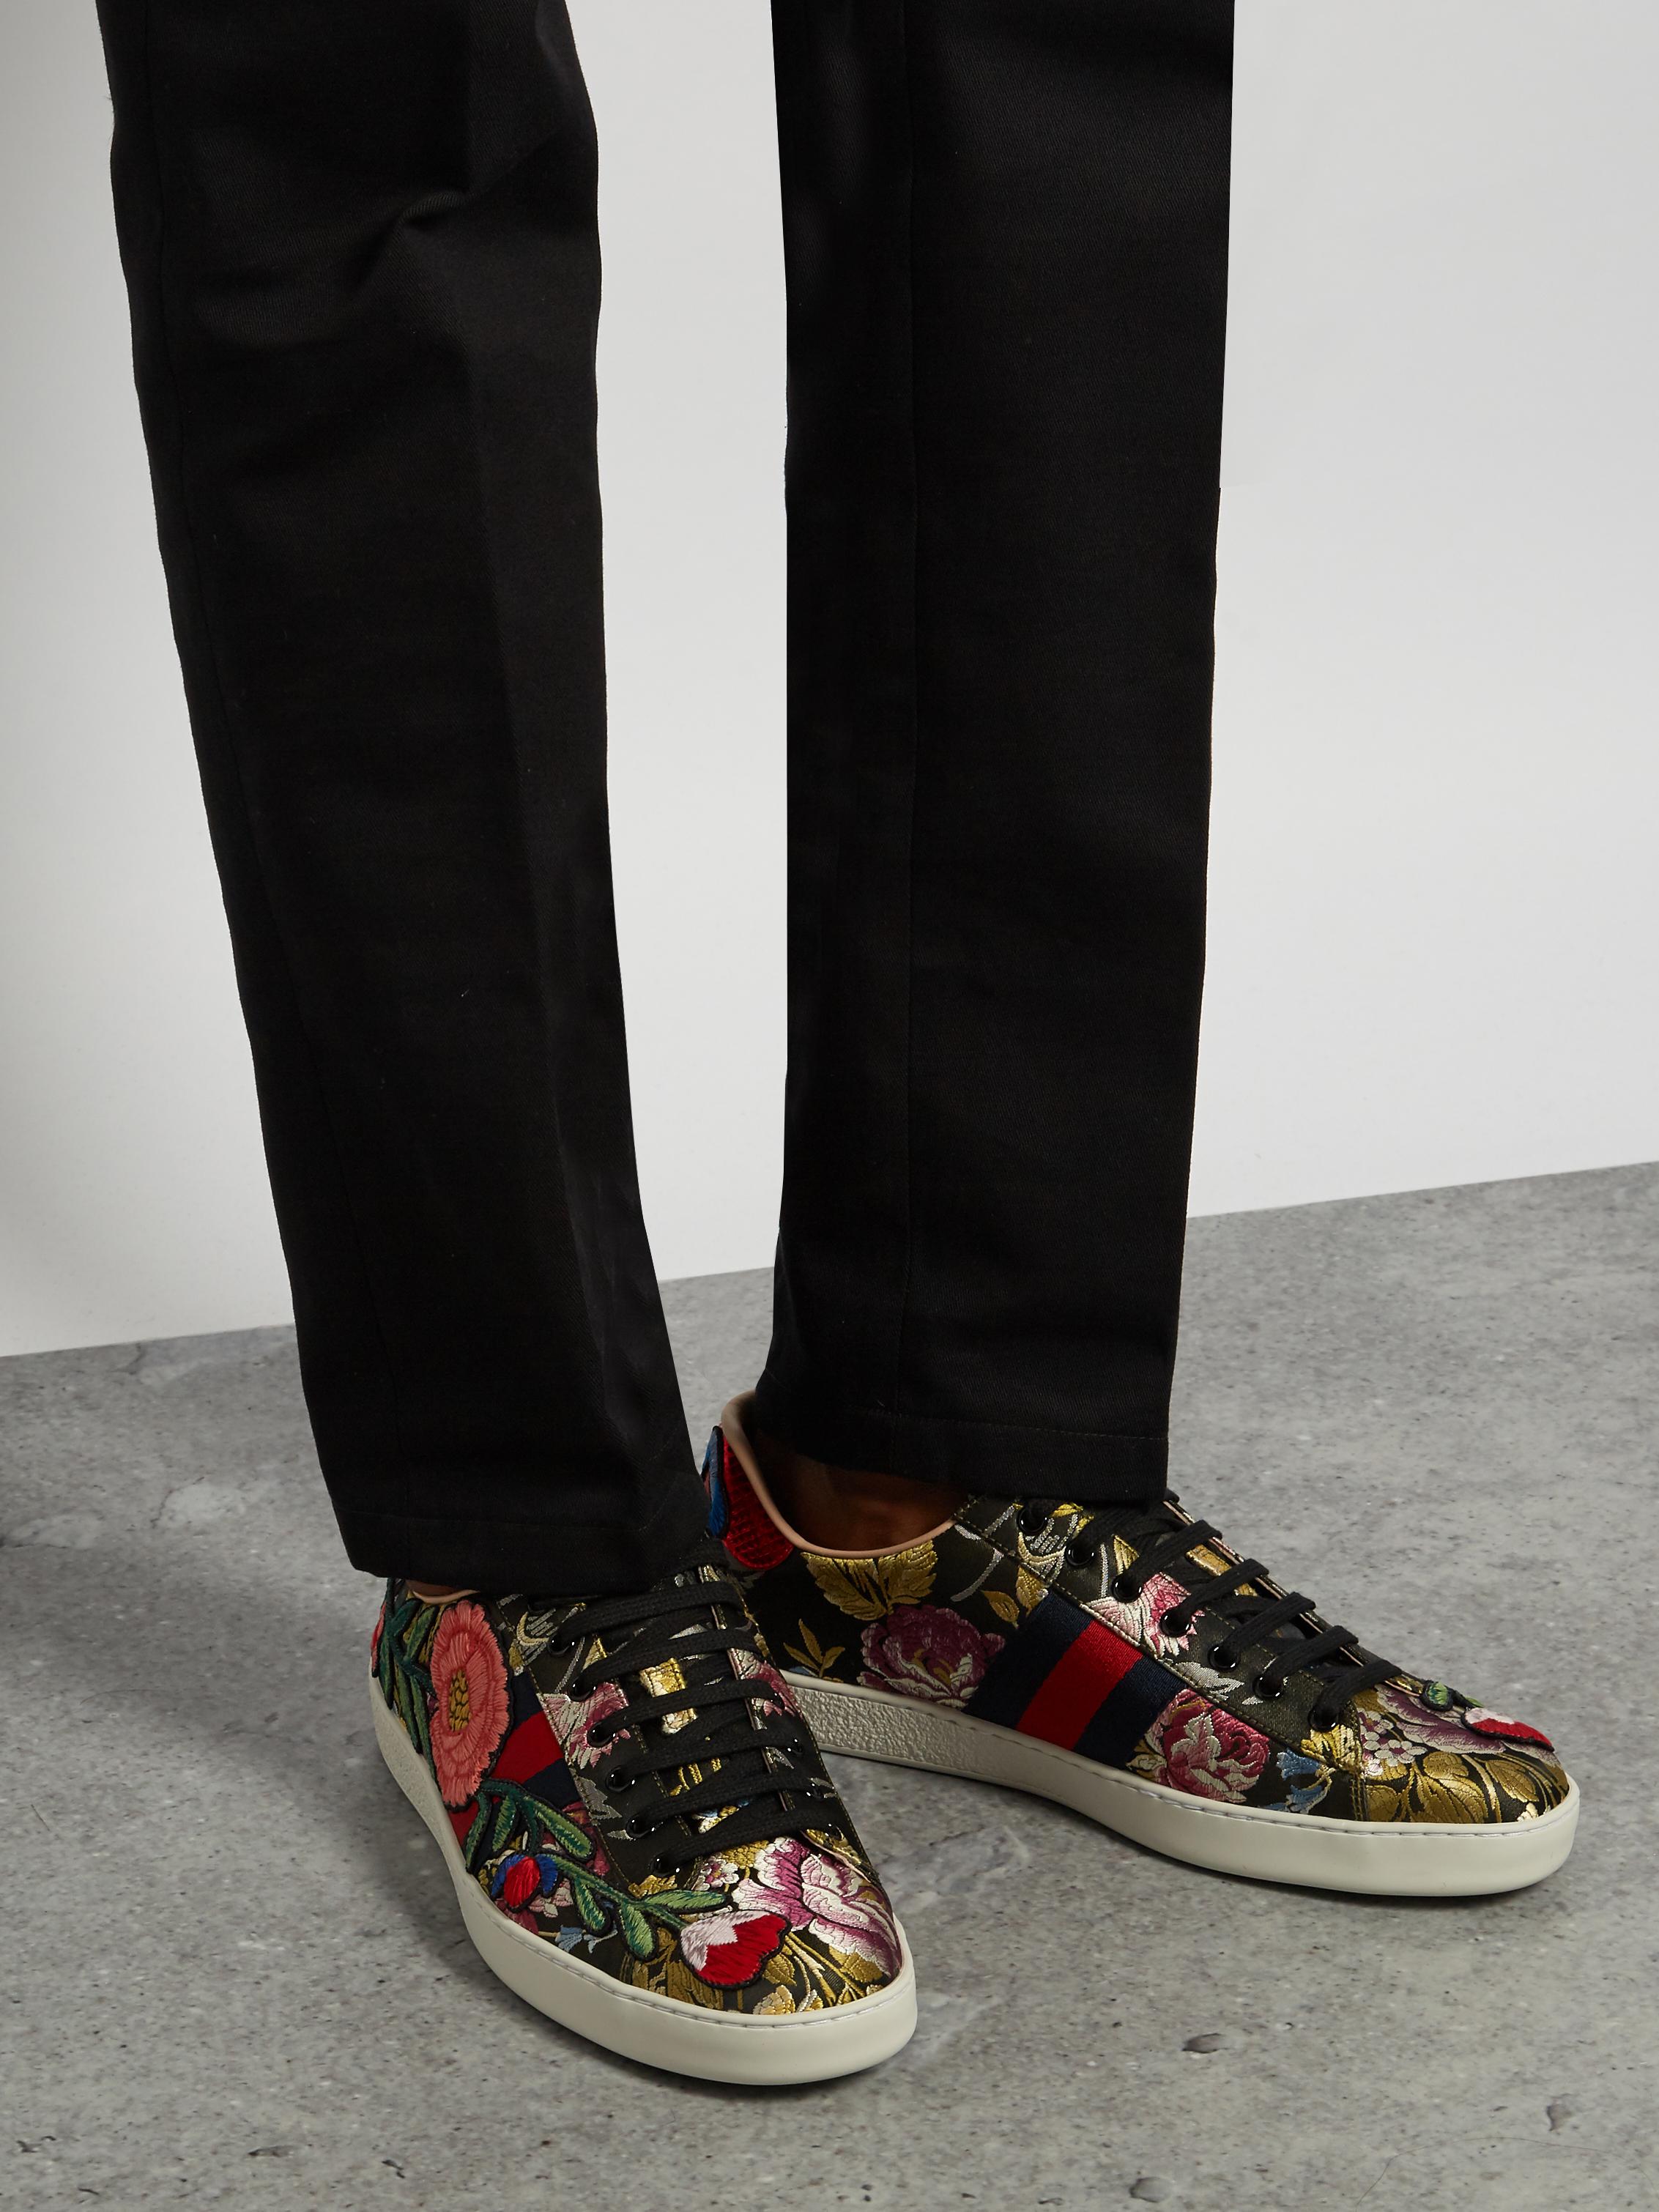 Gucci Leather Ace Low-top Floral-jacquard Trainers in Black for Men - Lyst